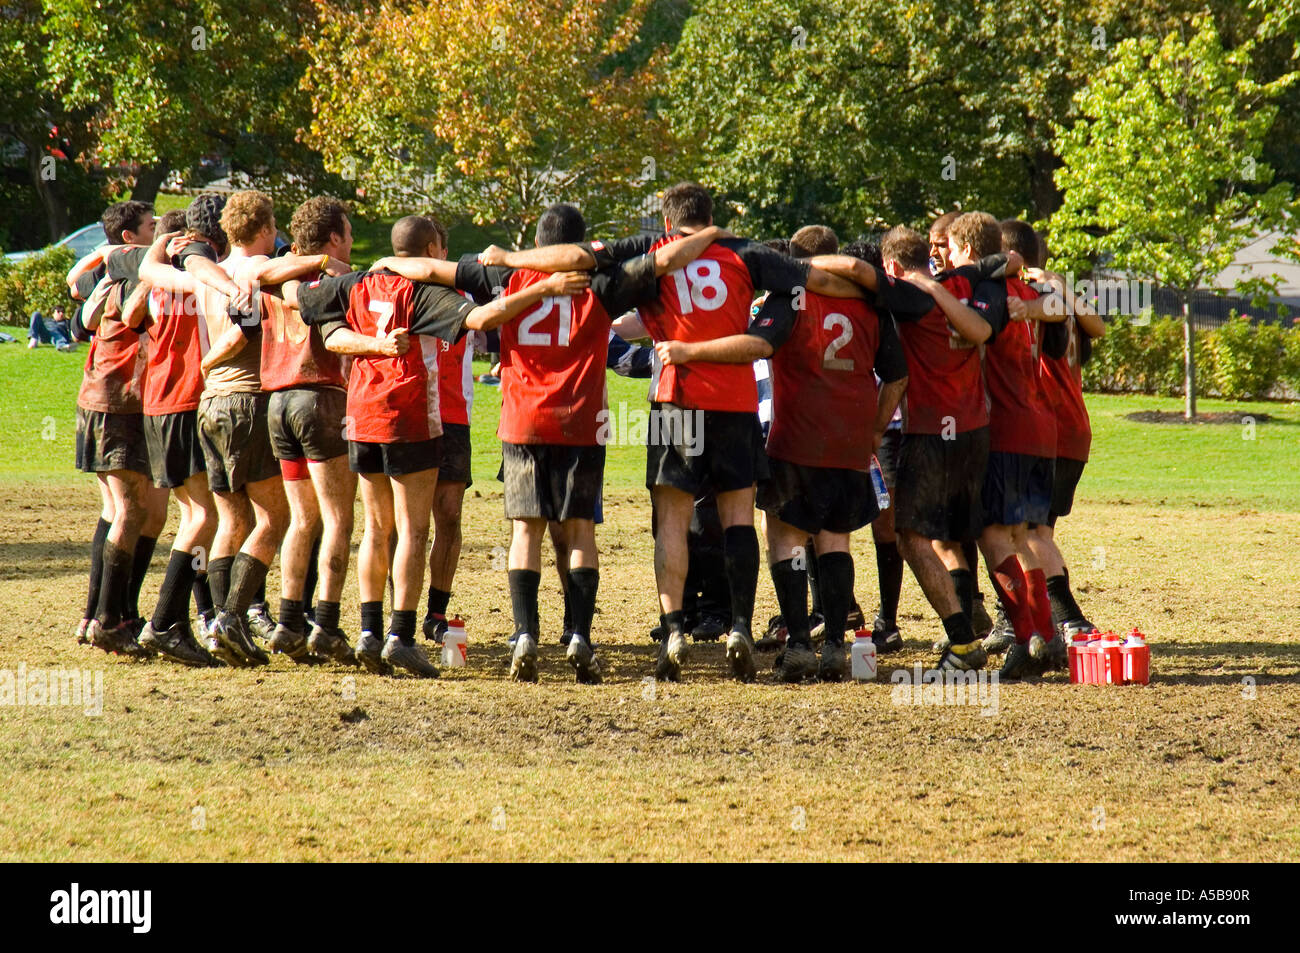 Group of rugby team members rallying together. Stock Photo